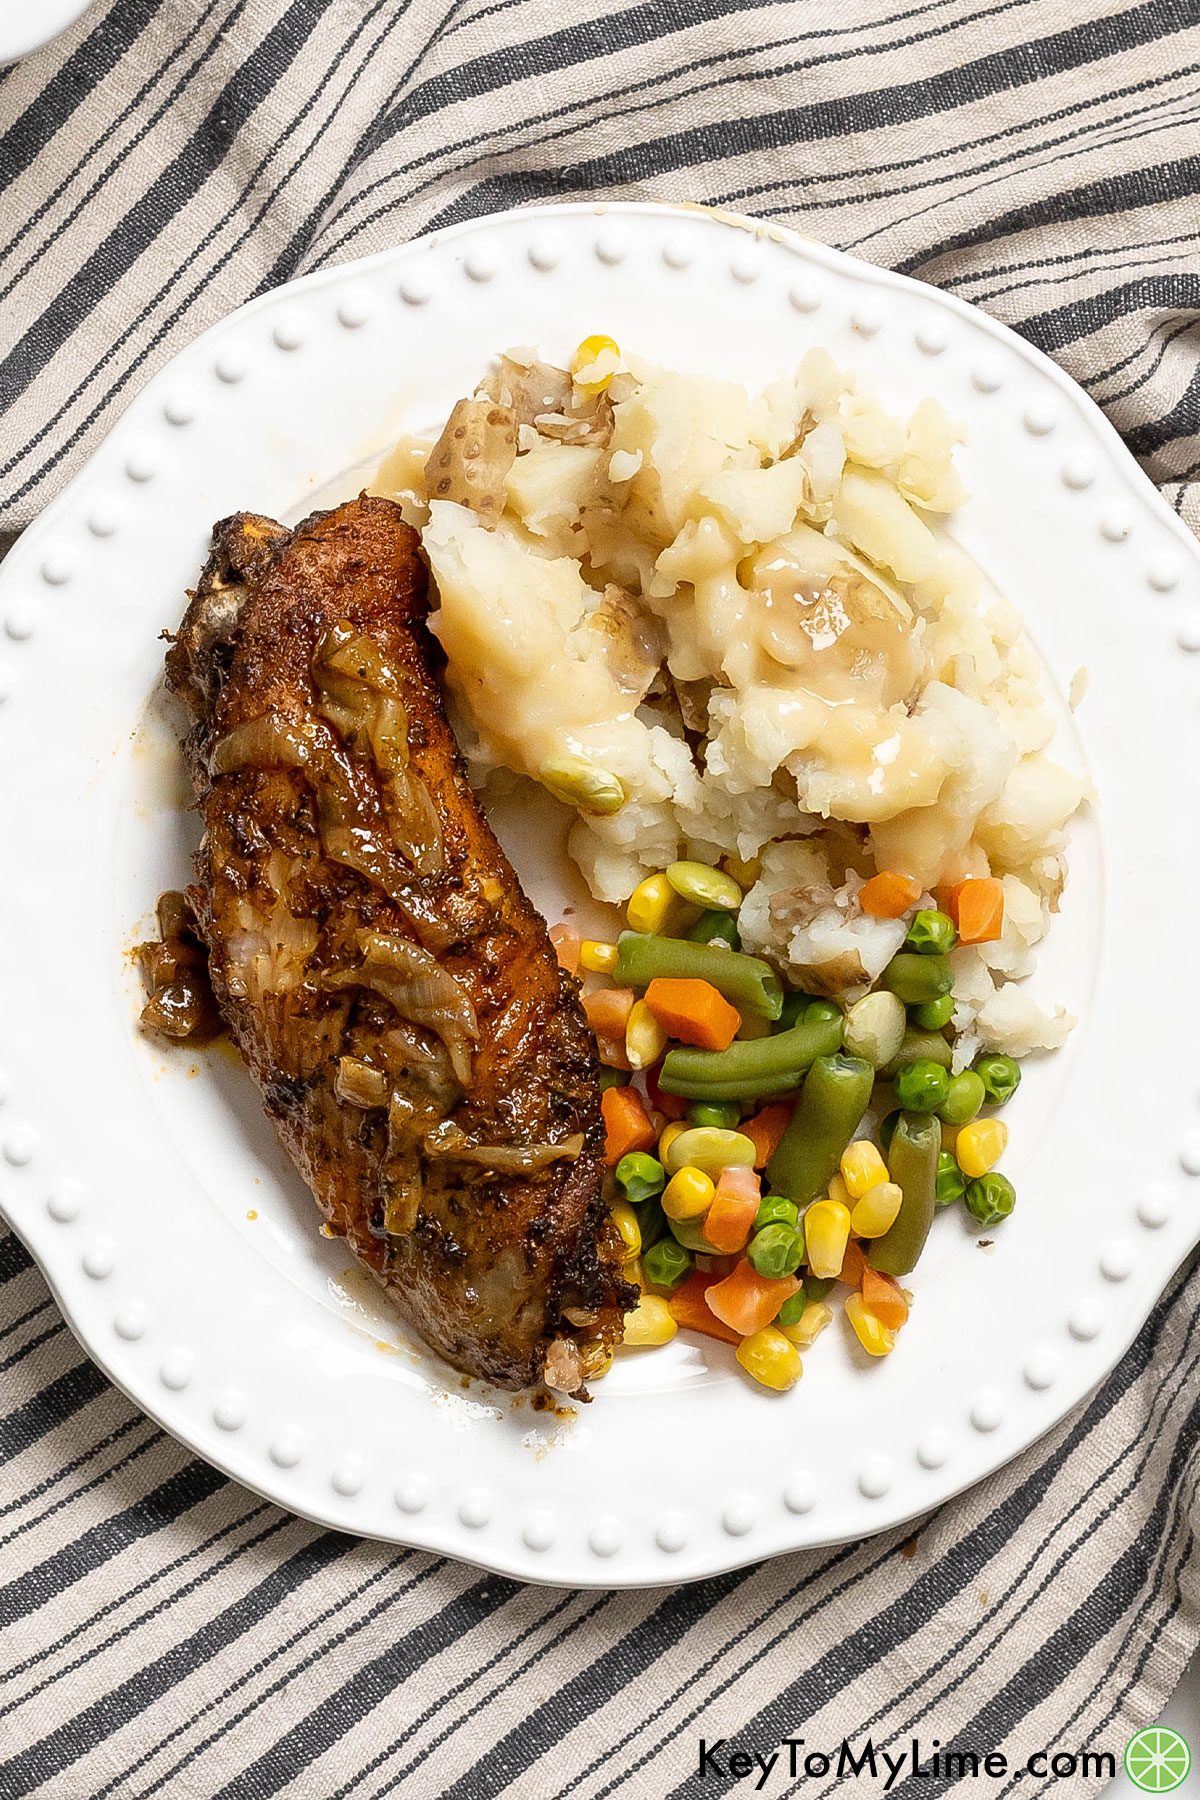 An overhead images of a plated turkey dinner with mixed vegetables and potatoes to the side.